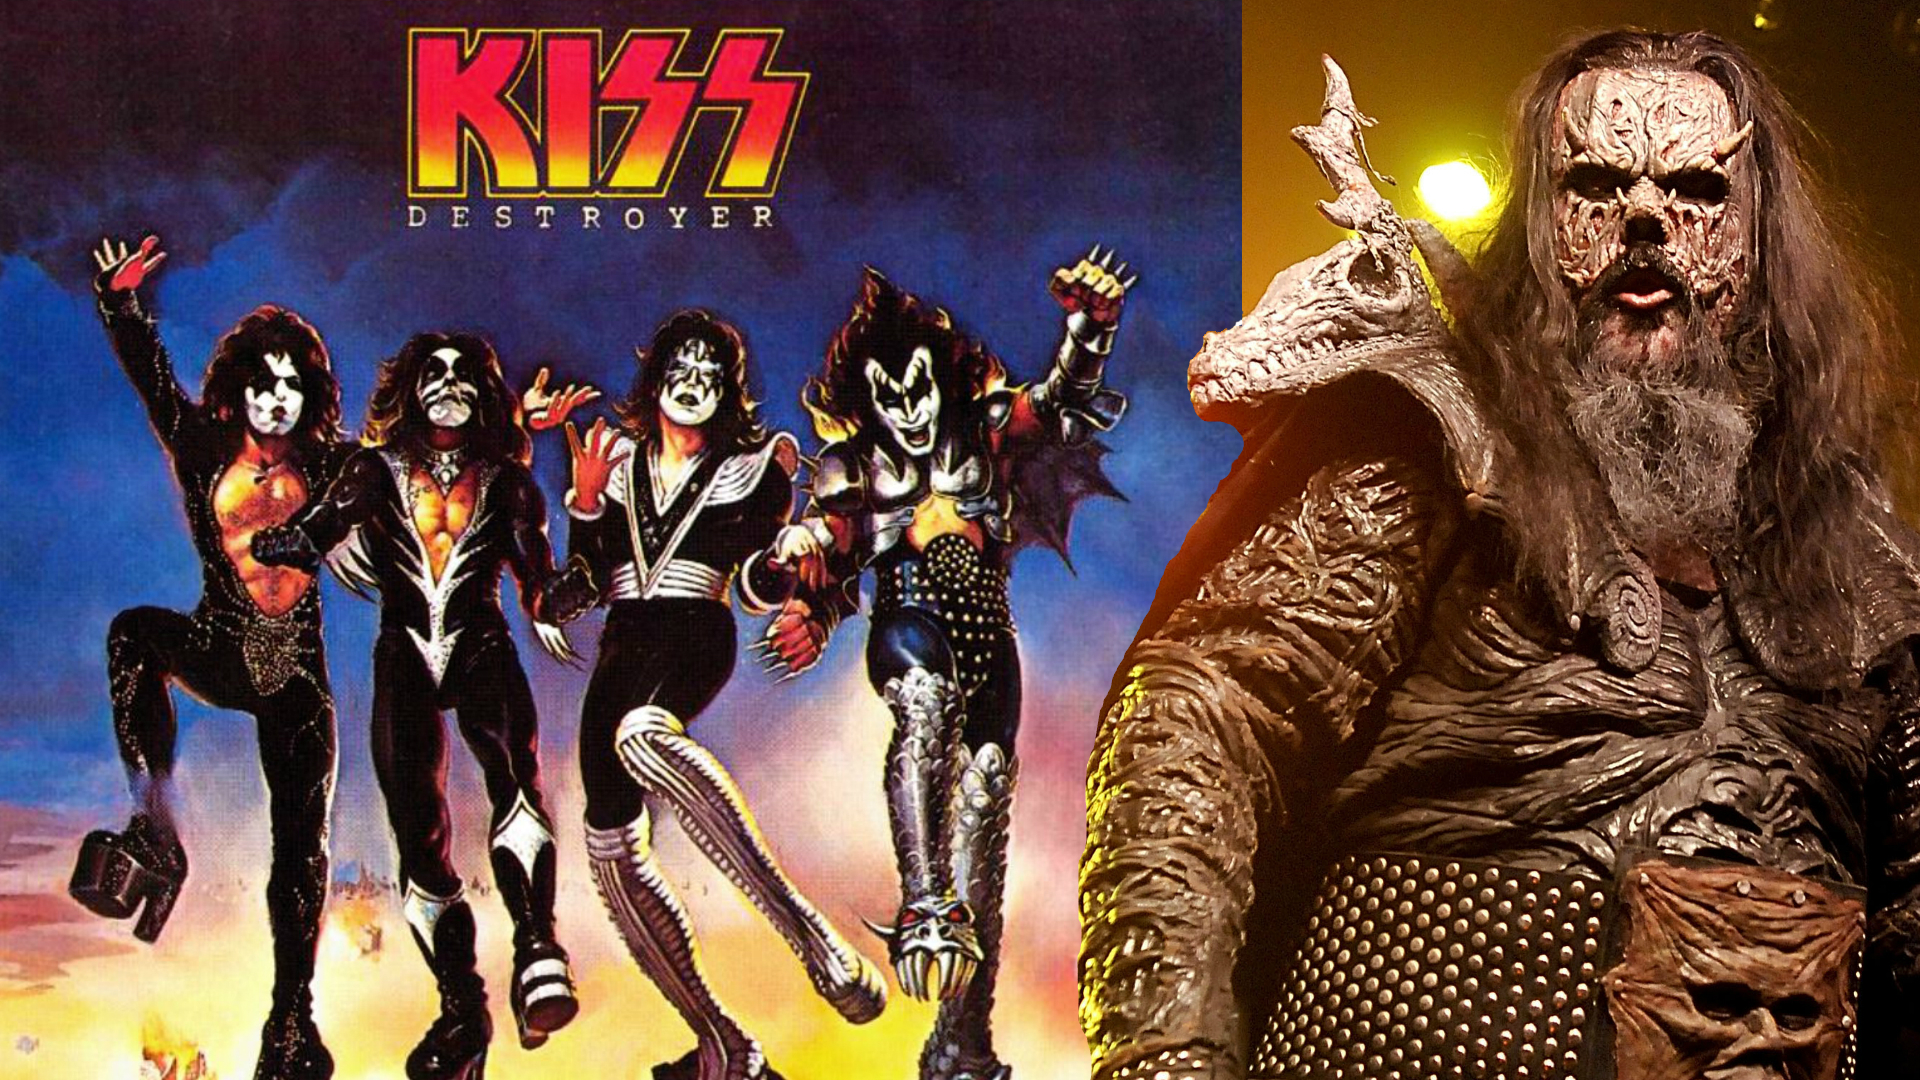 Why I Love Kiss Destroyer By Lordi S Mr Lordi Louder